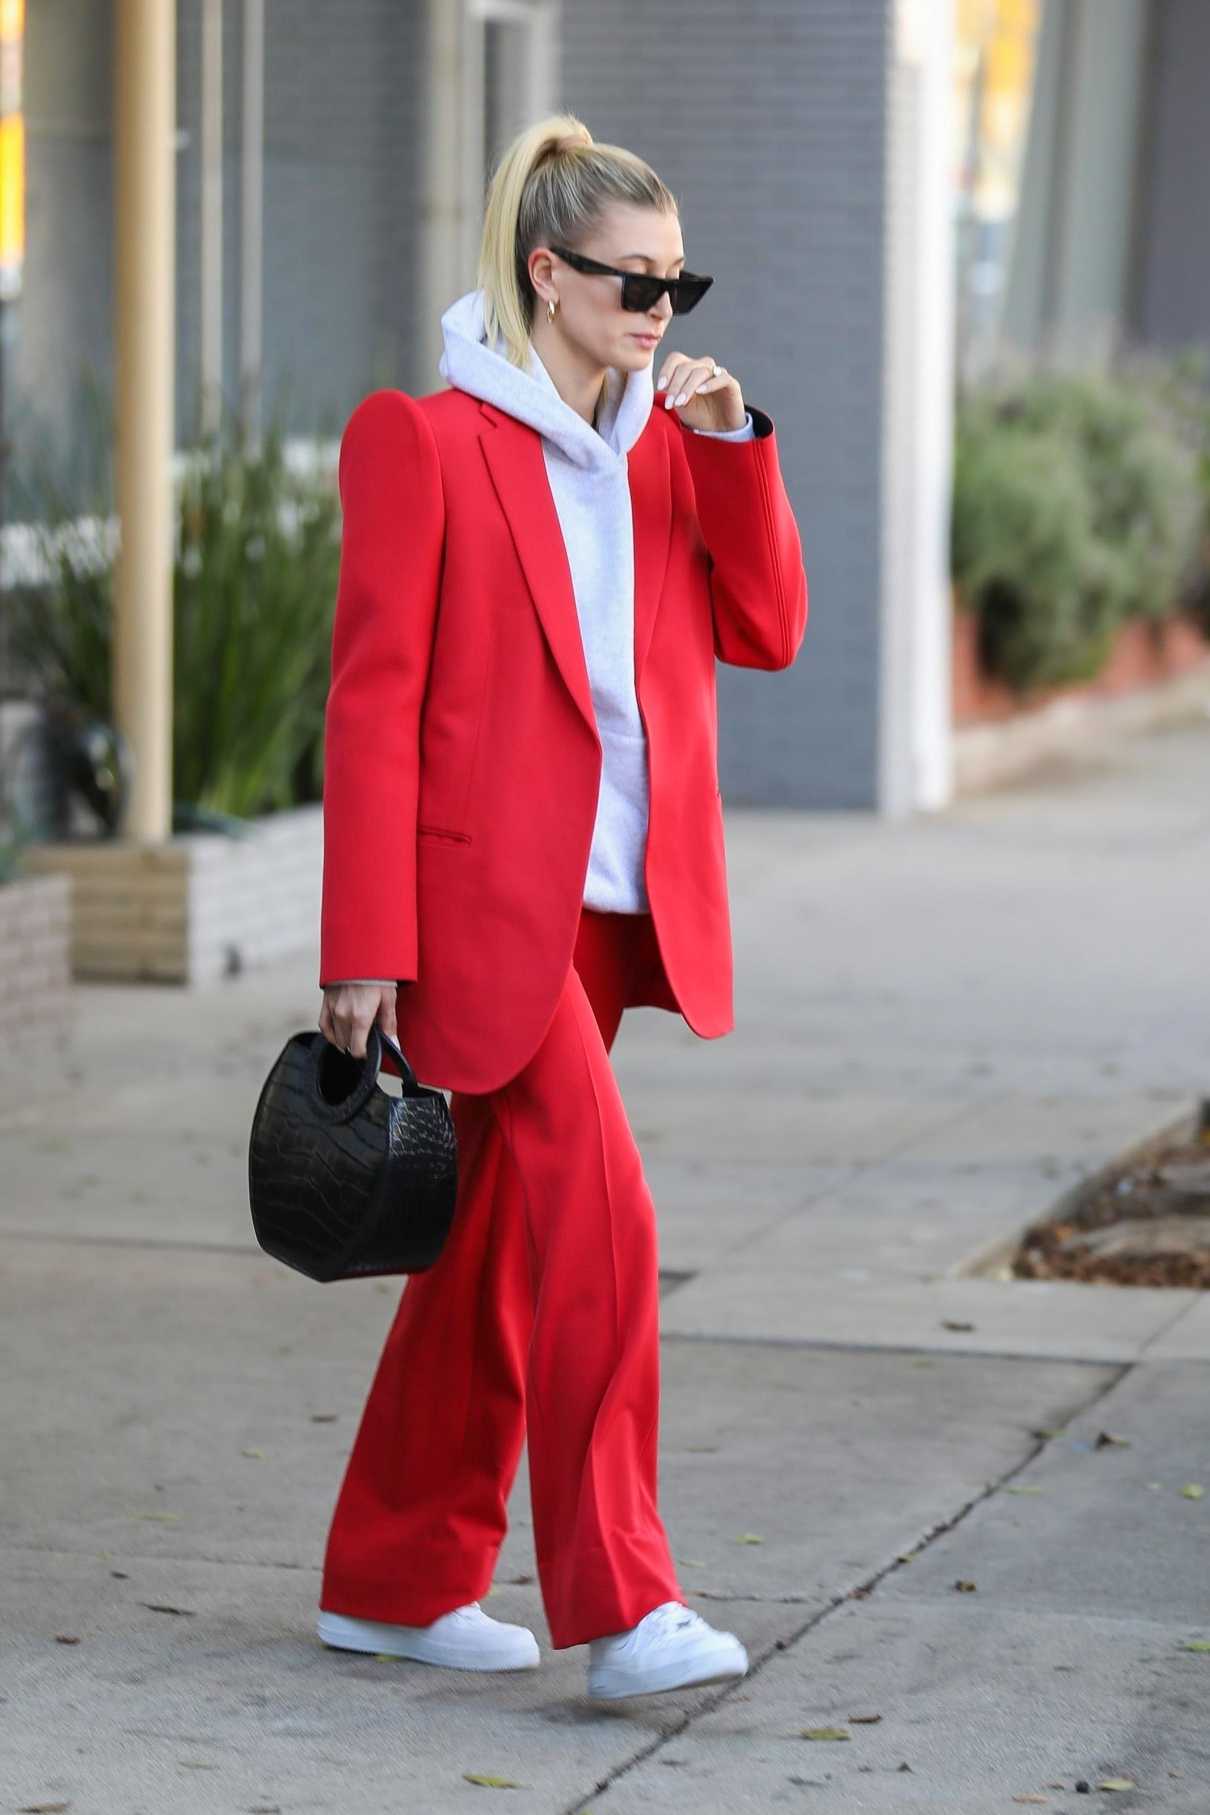 Hailey Baldwin In A Red Suit Was Seen Out In Beverly Hills 12 02 2019 1